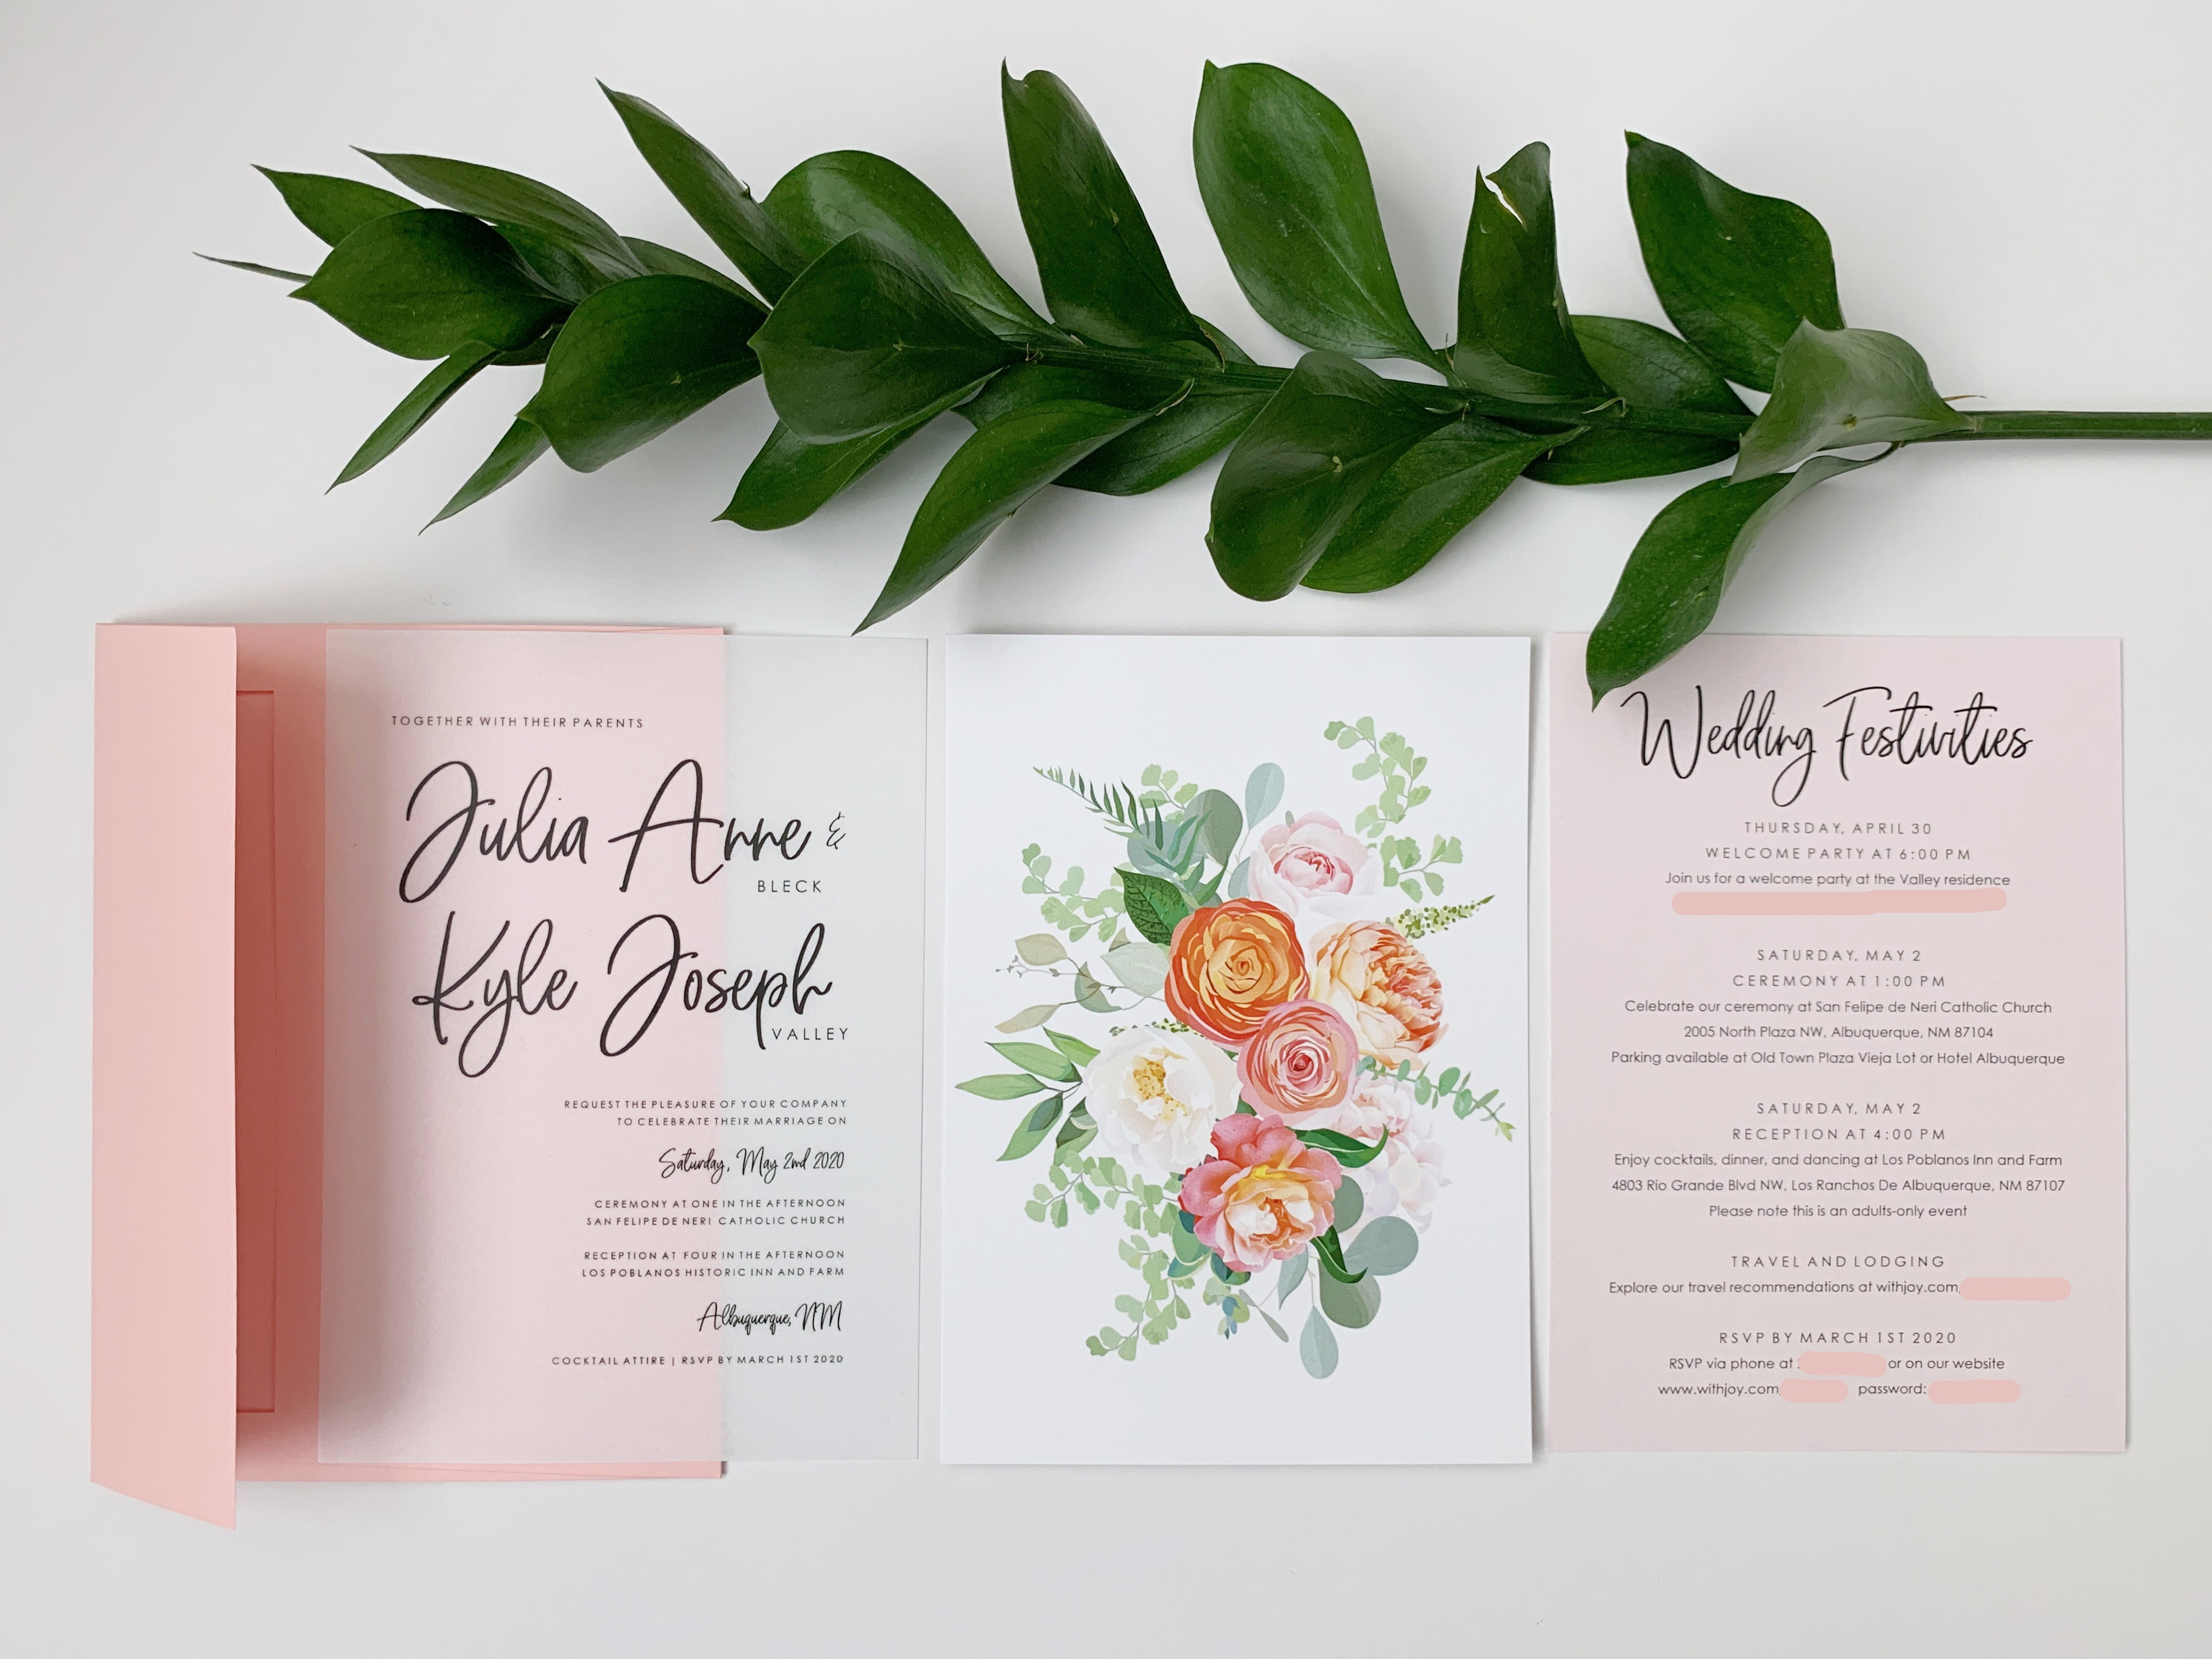 How to Design and Print Your Own Wedding Invitations - Sew Bake Decorate